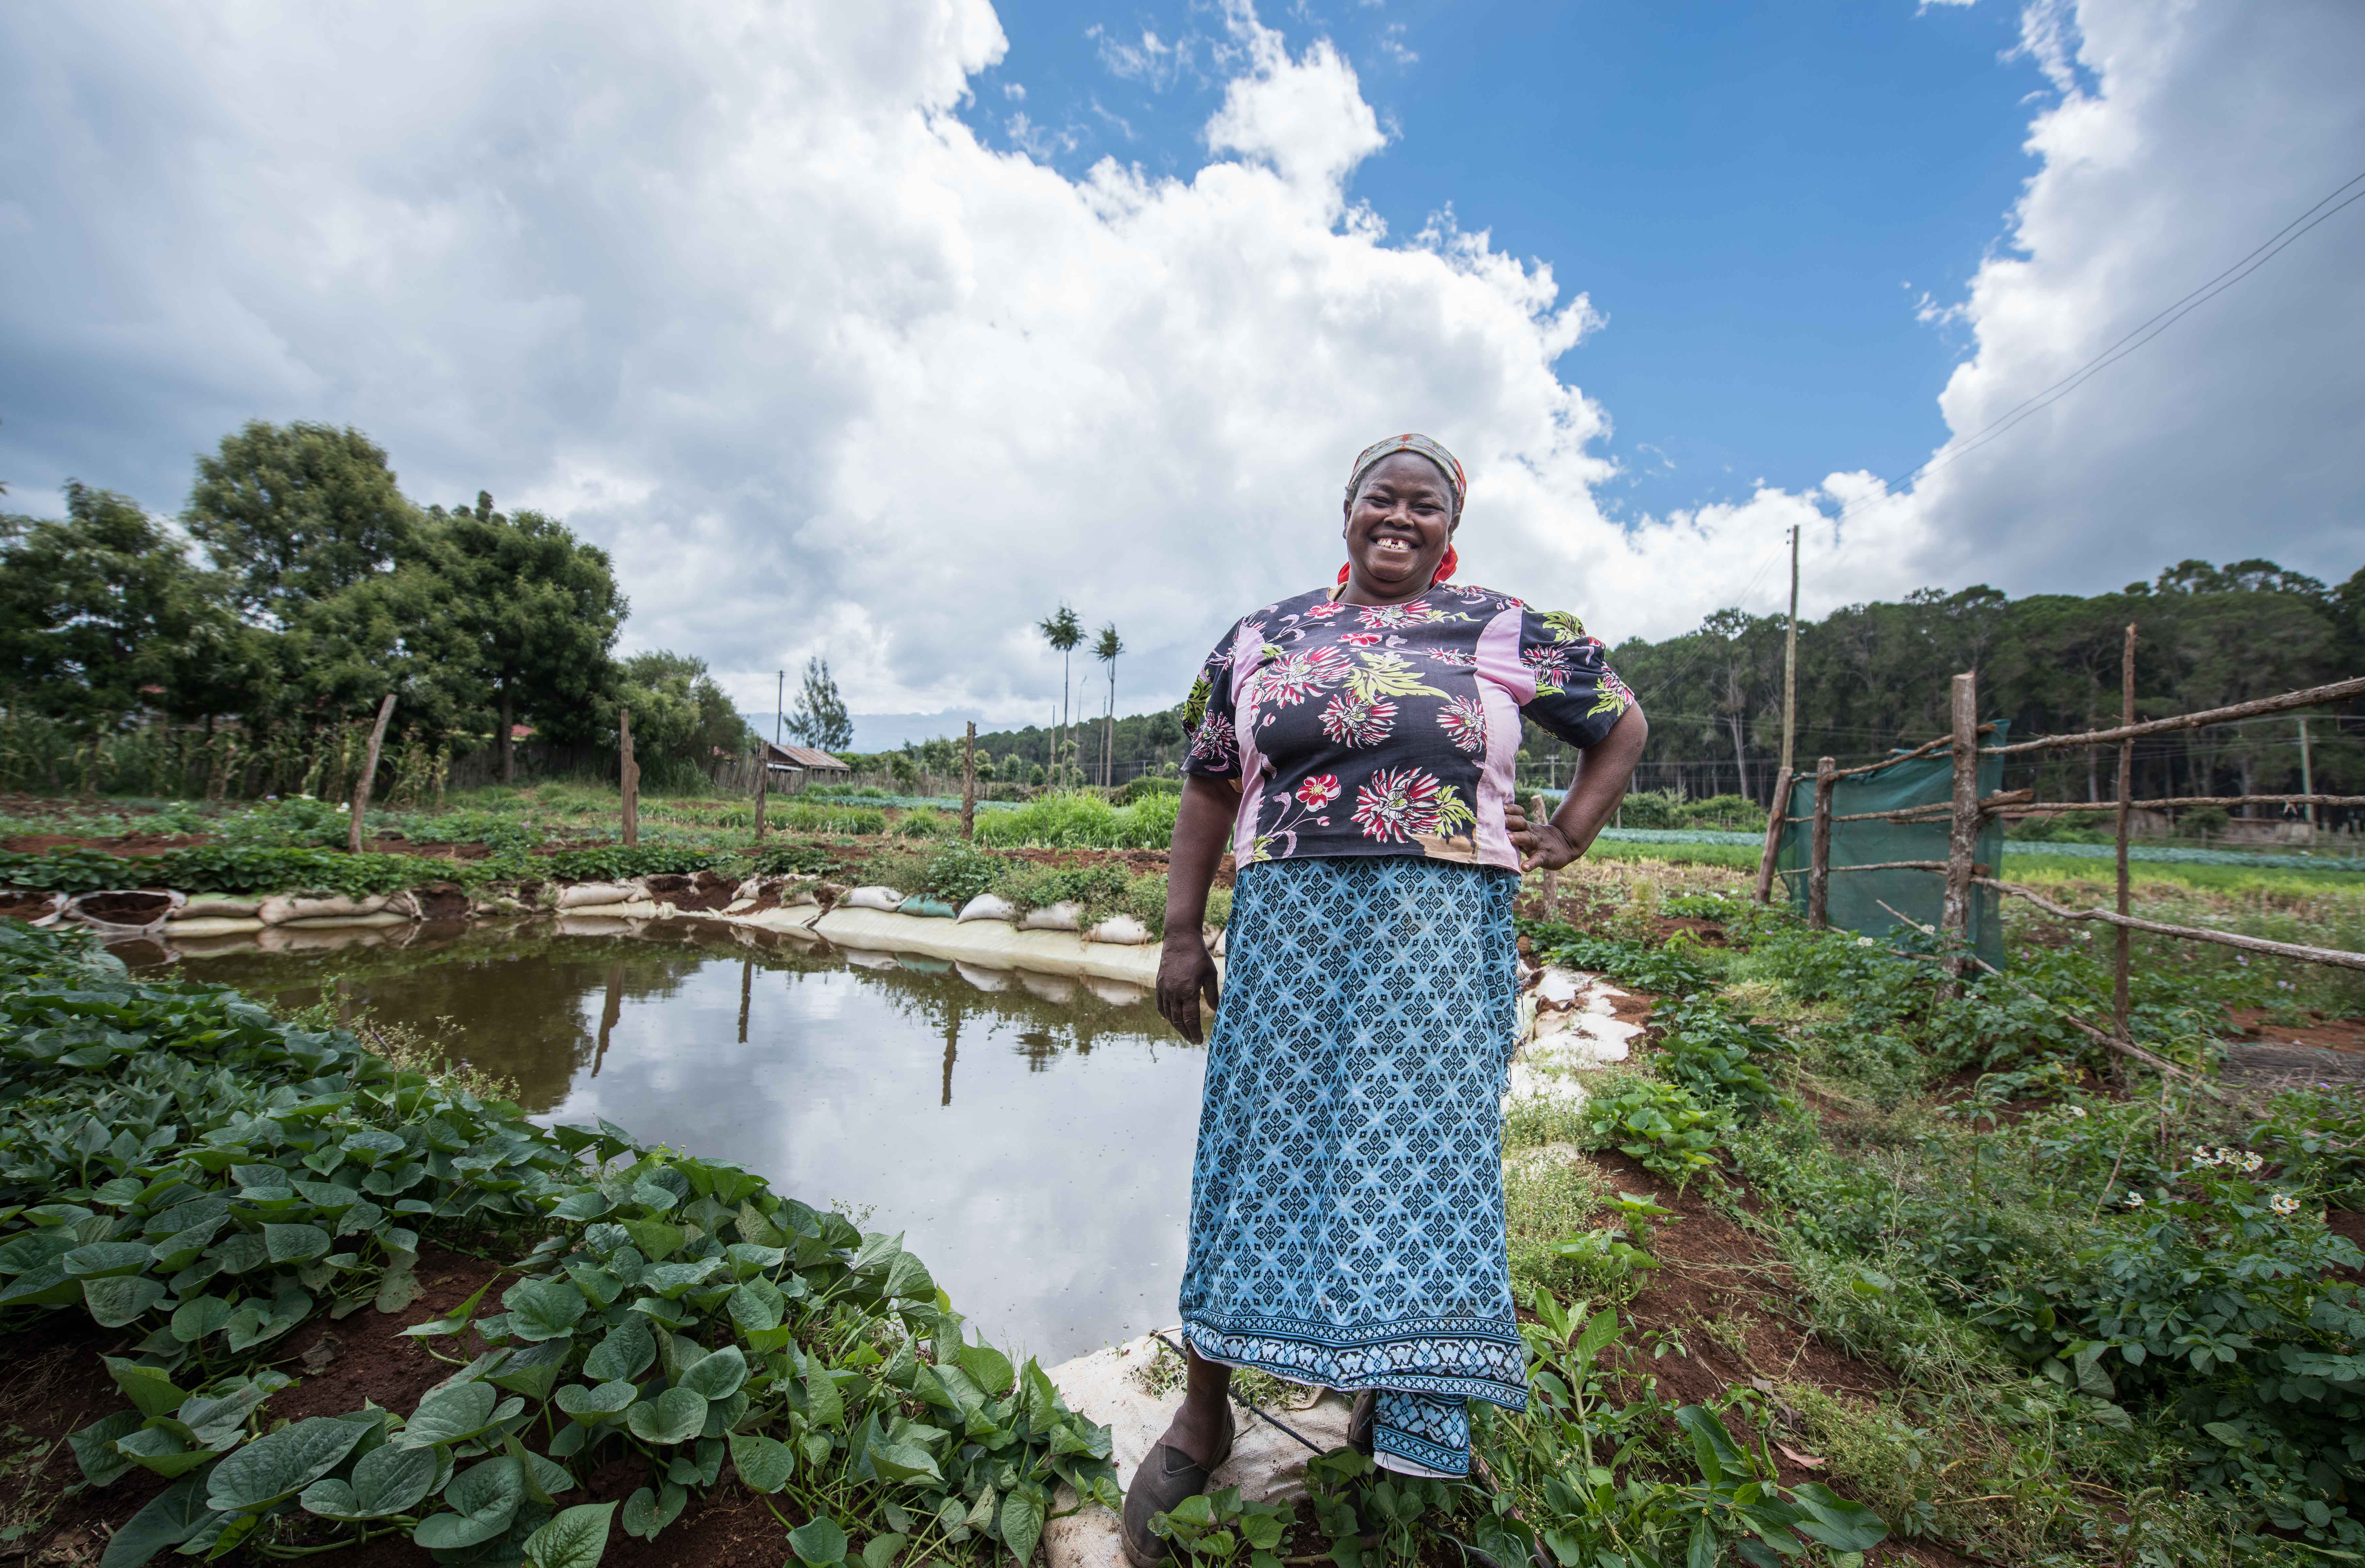 A farmer by her 50,000 liters water pan for growing vegetables in Nyeri County. Photo credit: Roshni Lodhia/TNC